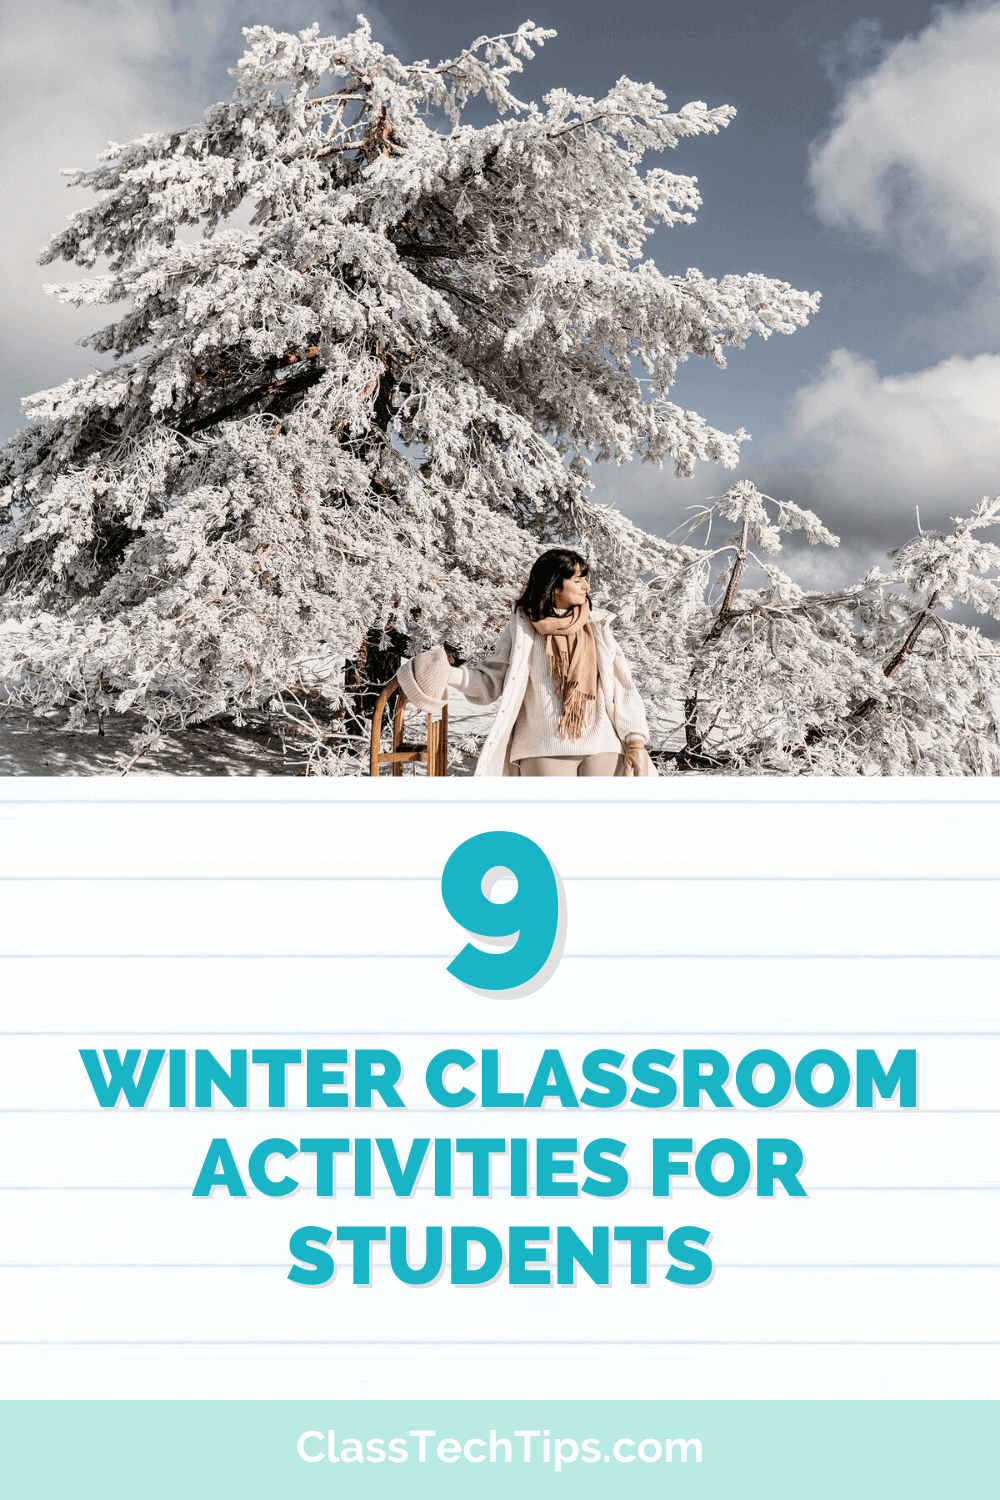 Teacher outside in the snow, illustrating a blog post about engaging winter classroom activities for students.